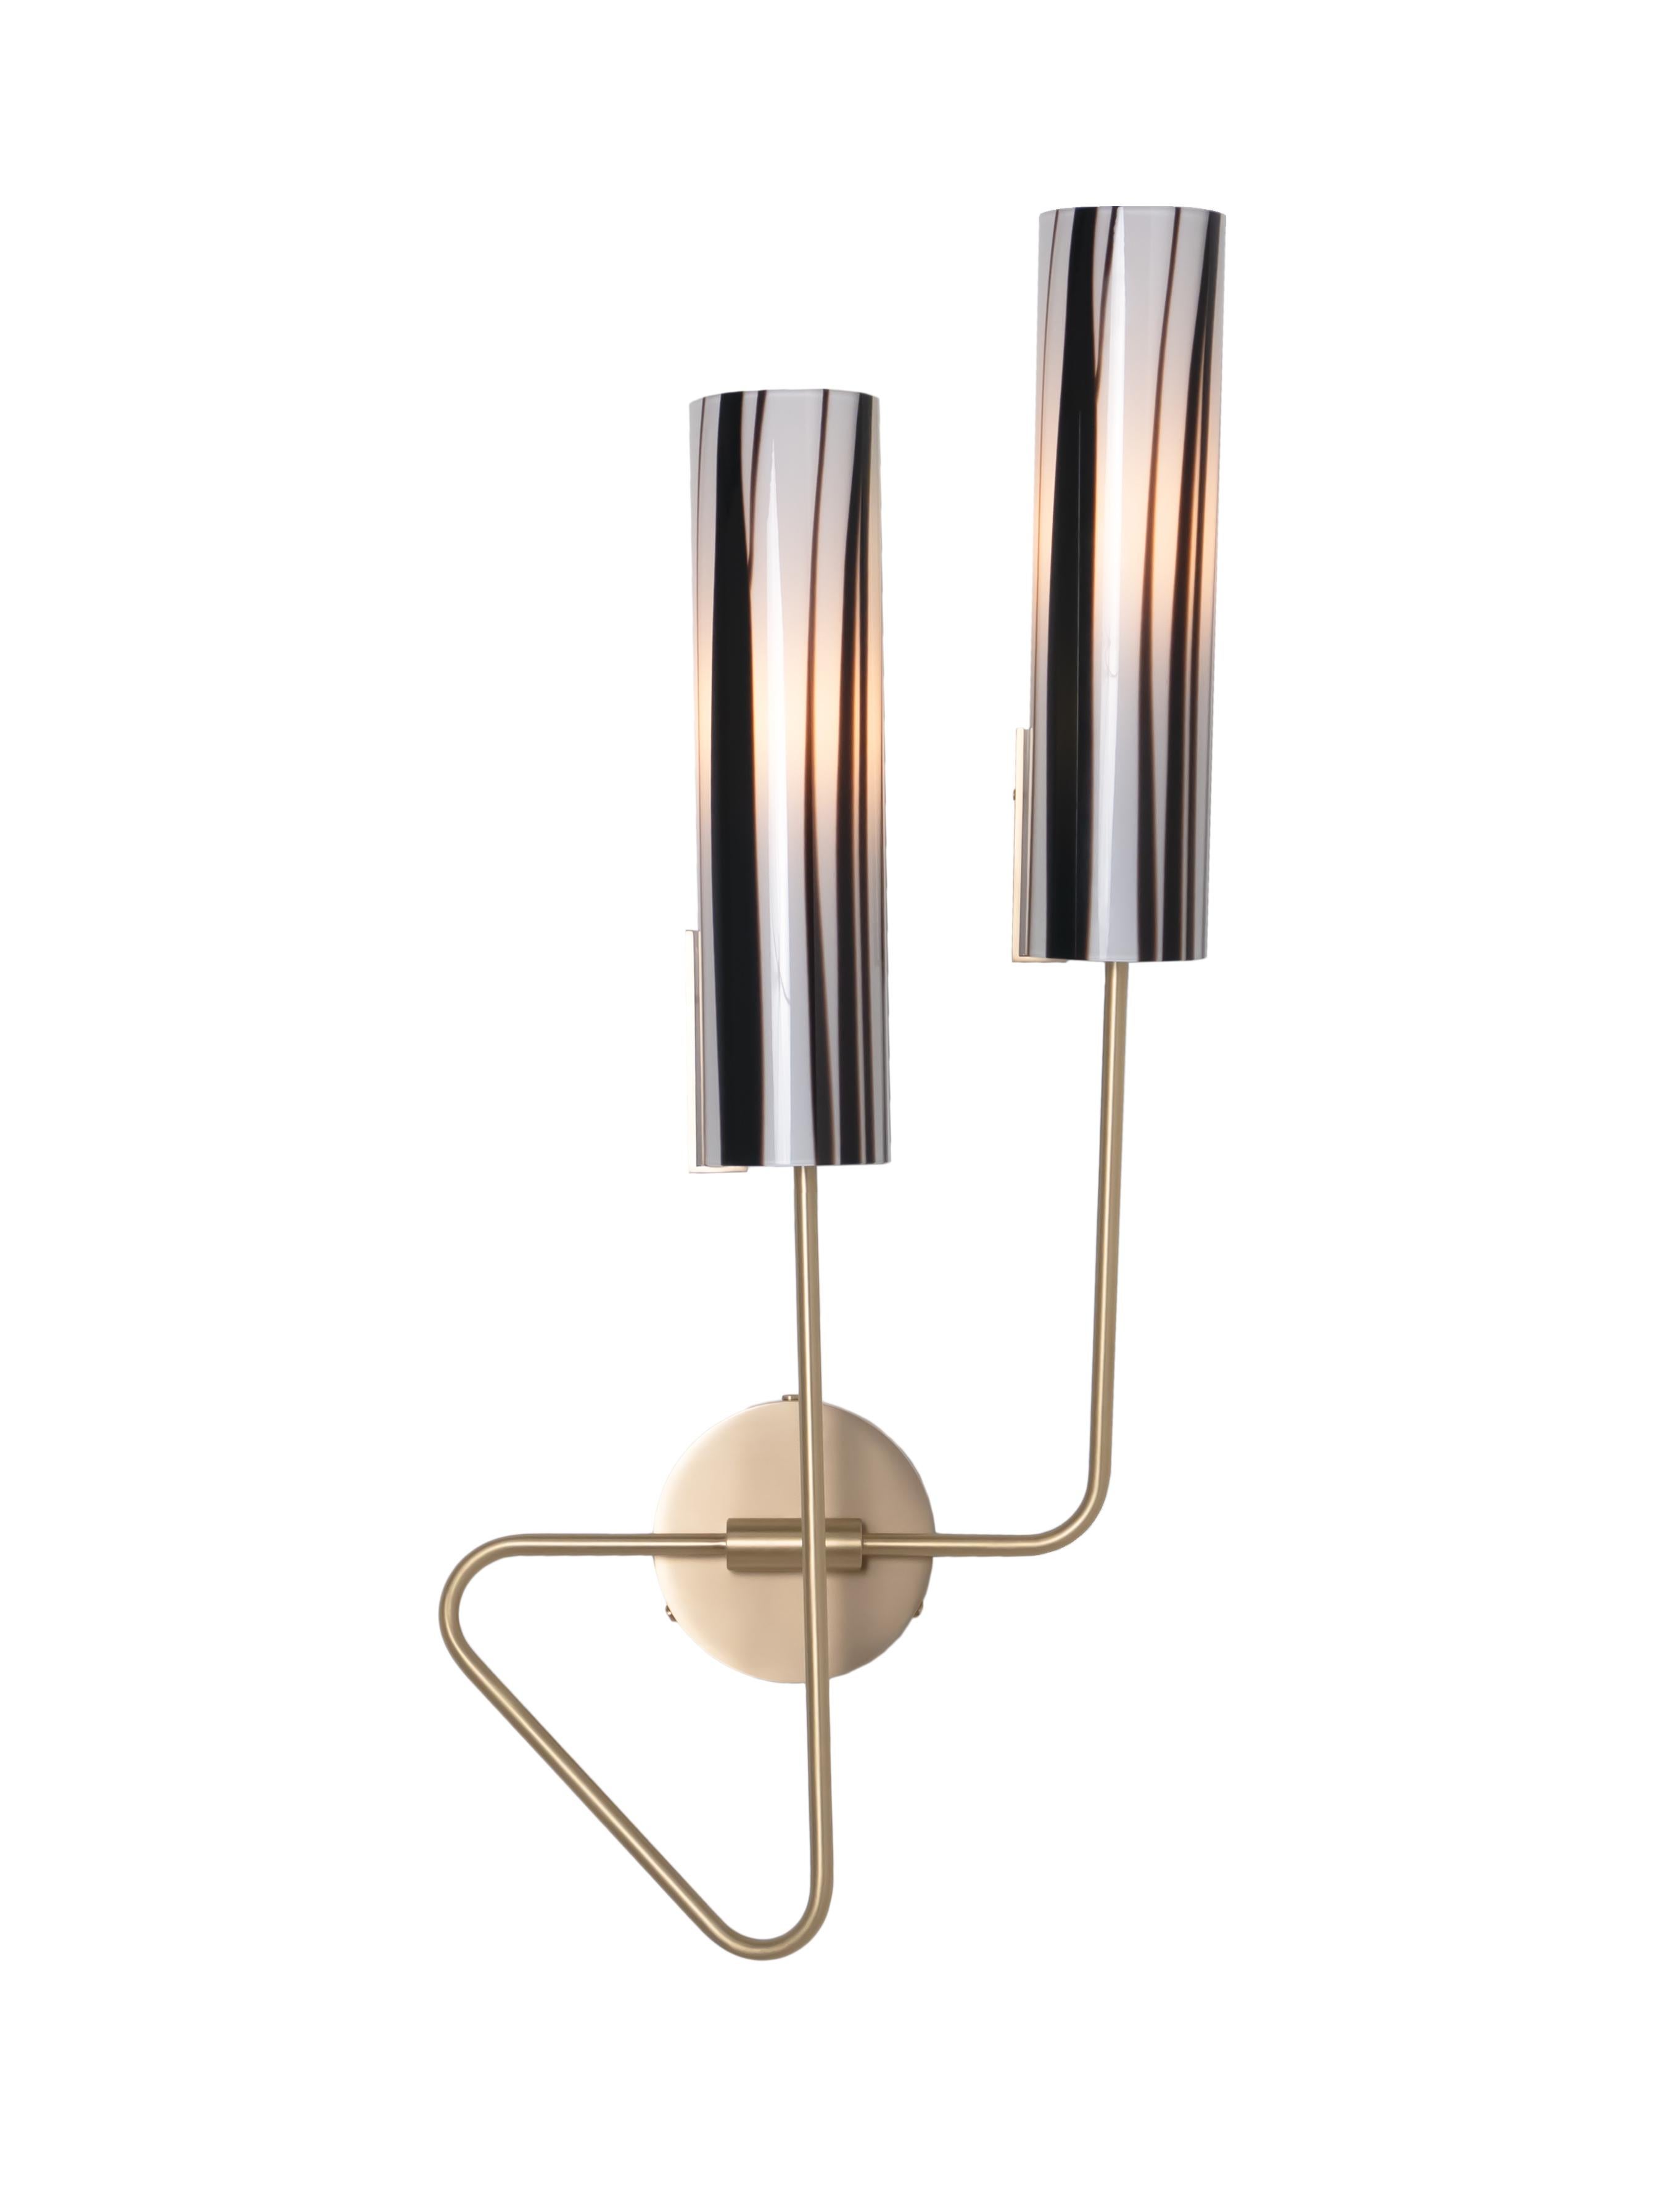 Continuum 01 Sconce: Satin Nickel/Slate Ombre Glass Shades by Avram Rusu Studio For Sale 8